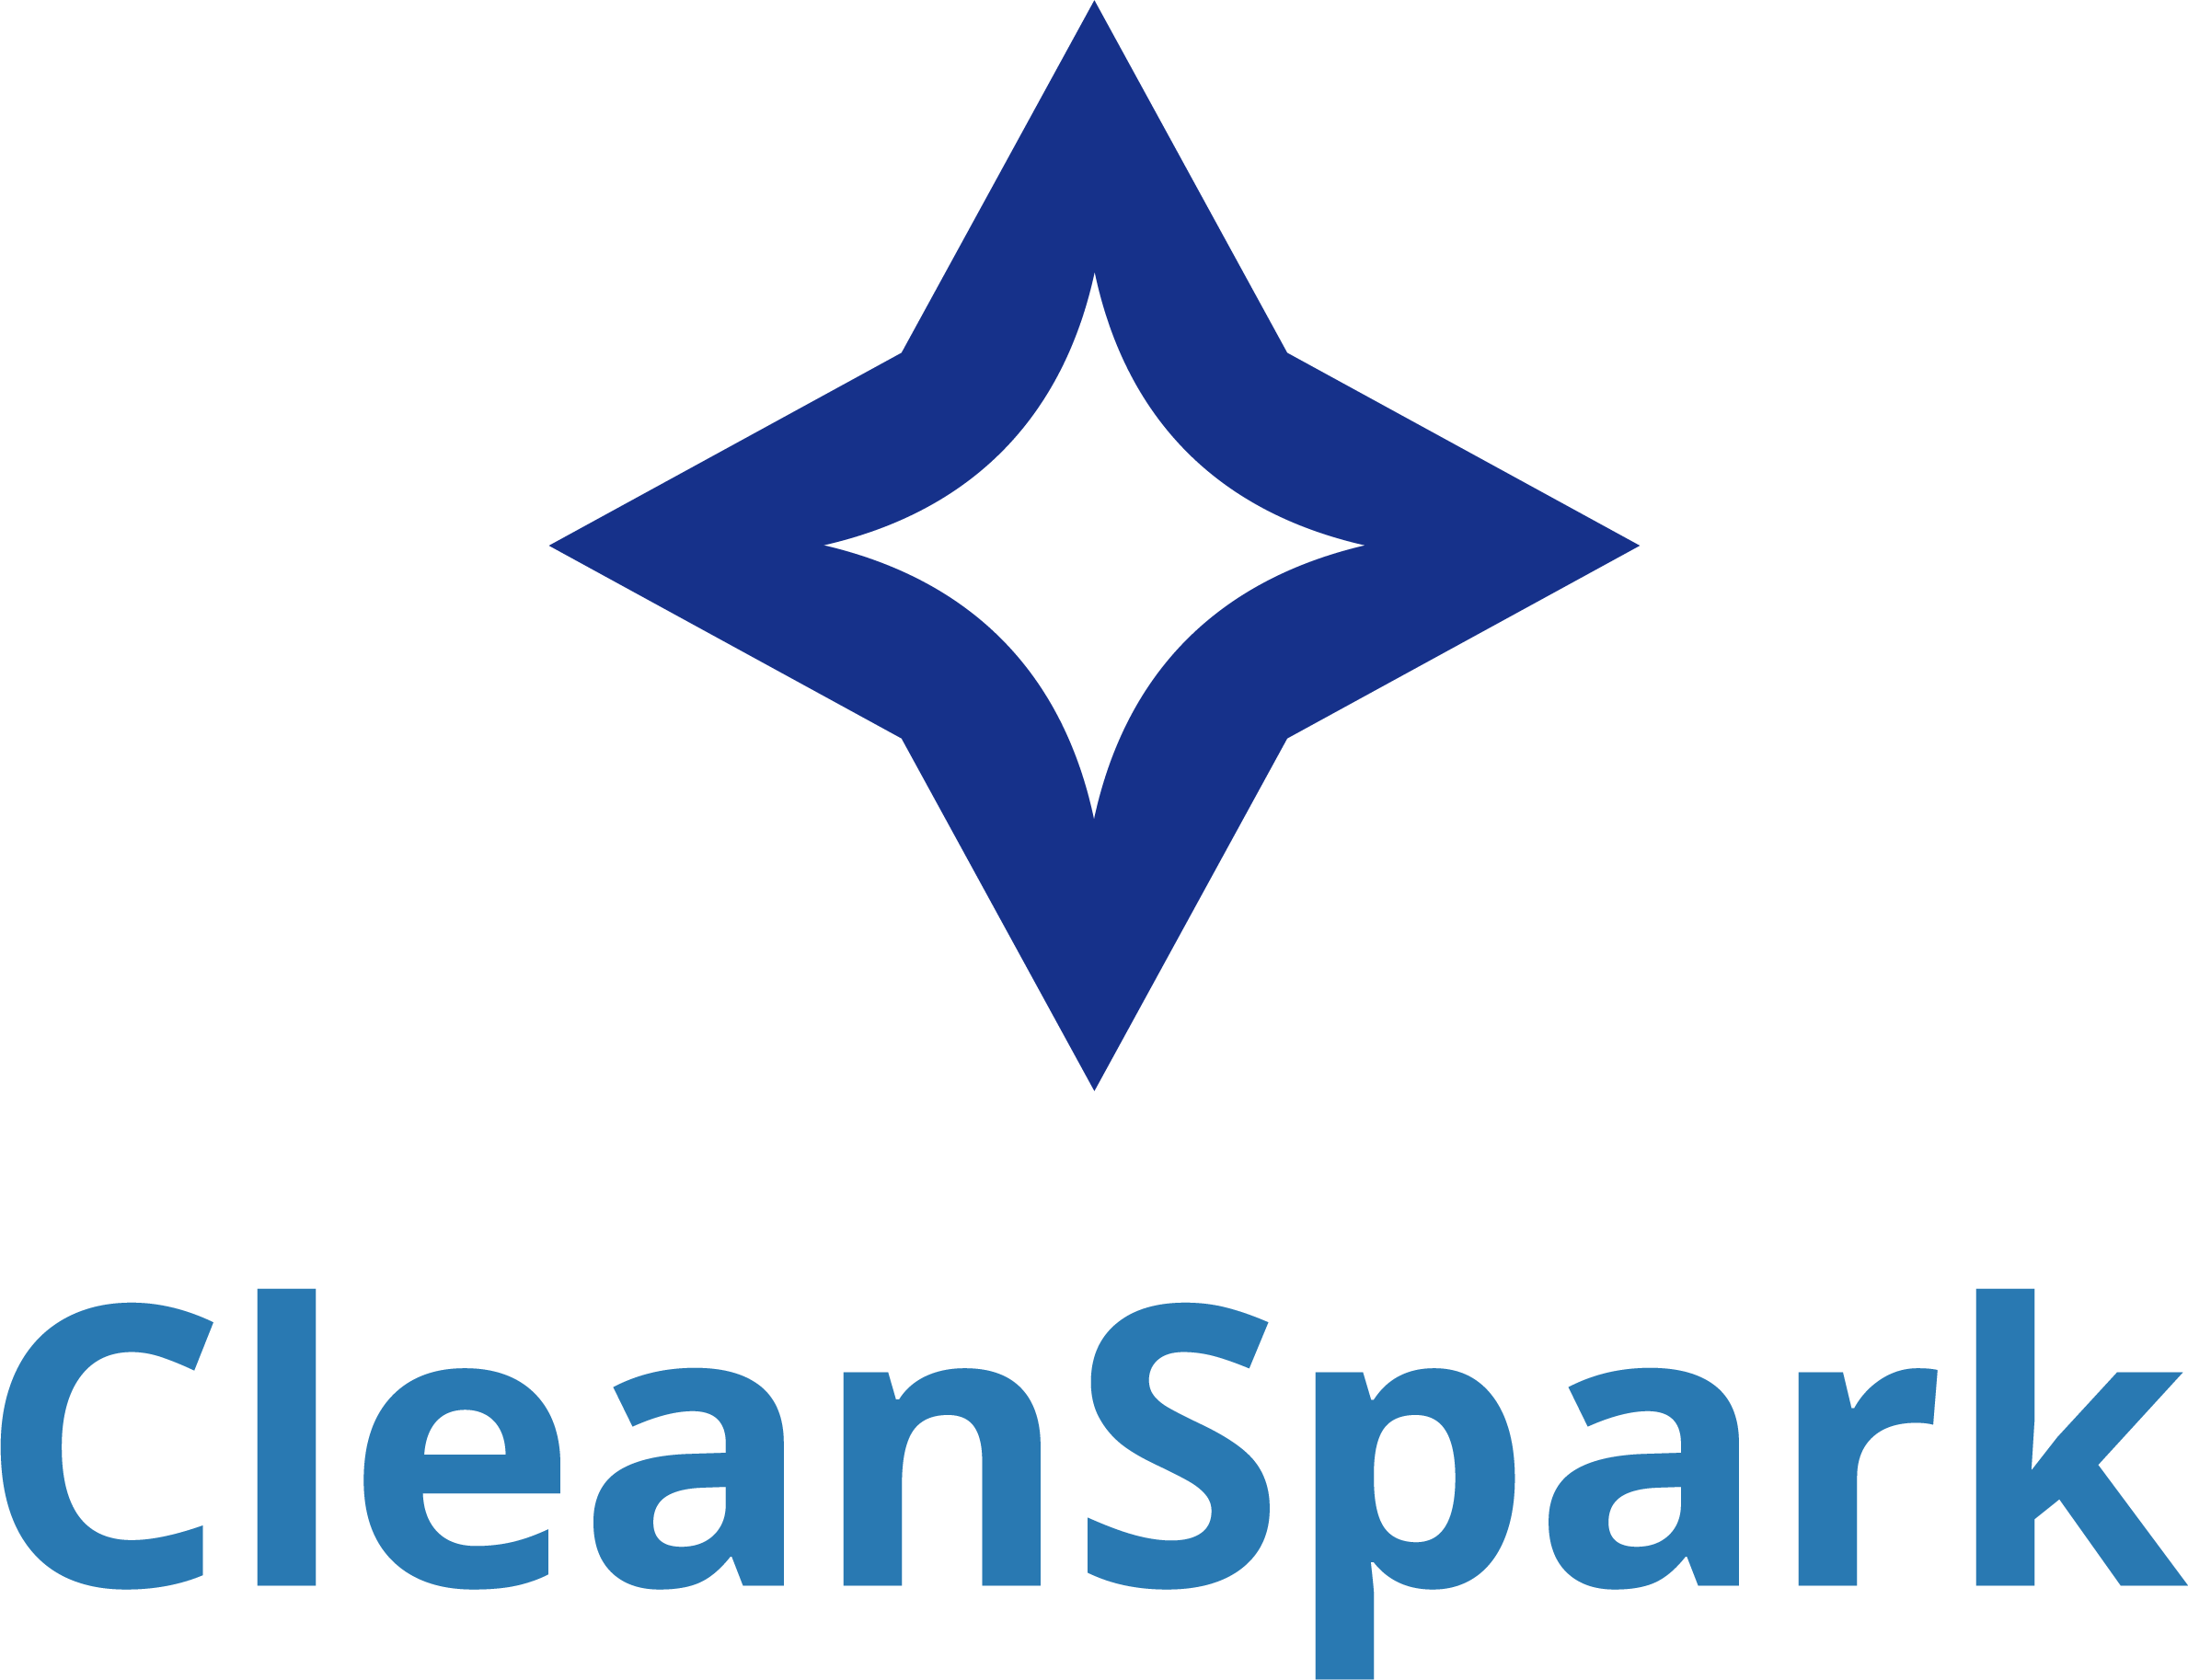 CleanSpark Reports R